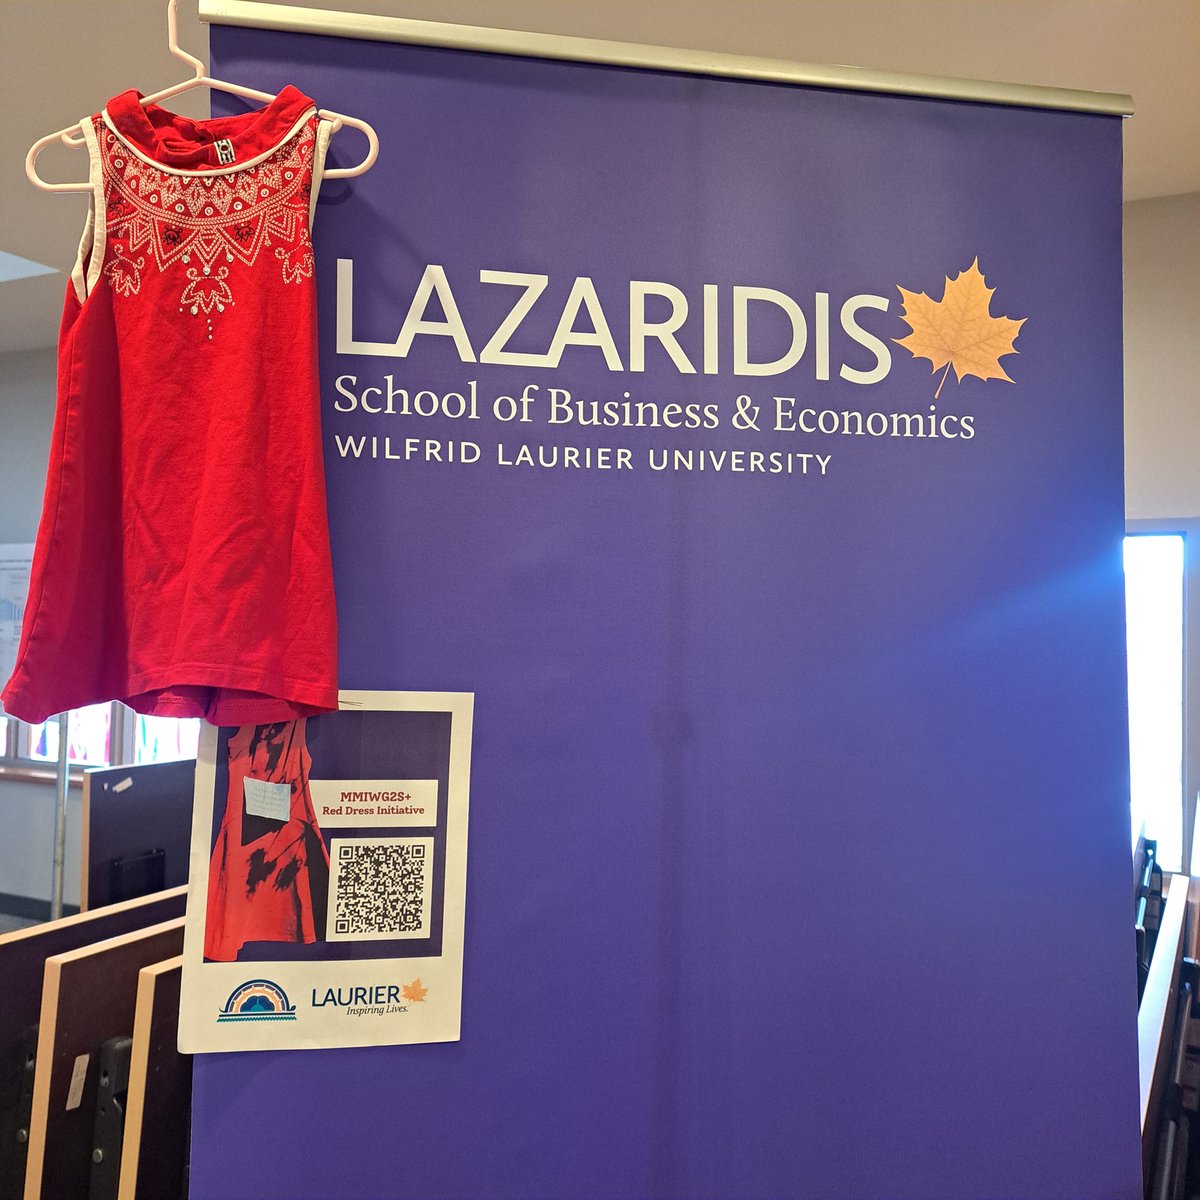 Thanks to Diana Petrmala (Altus Group) and Rhys Mendes (Bank of Canada) for a great exchange on Canada's cost of living, housing and monetary policy at the @LCERPA_EconWLU @LazaridisSchool Economic Outlook 2024 today.